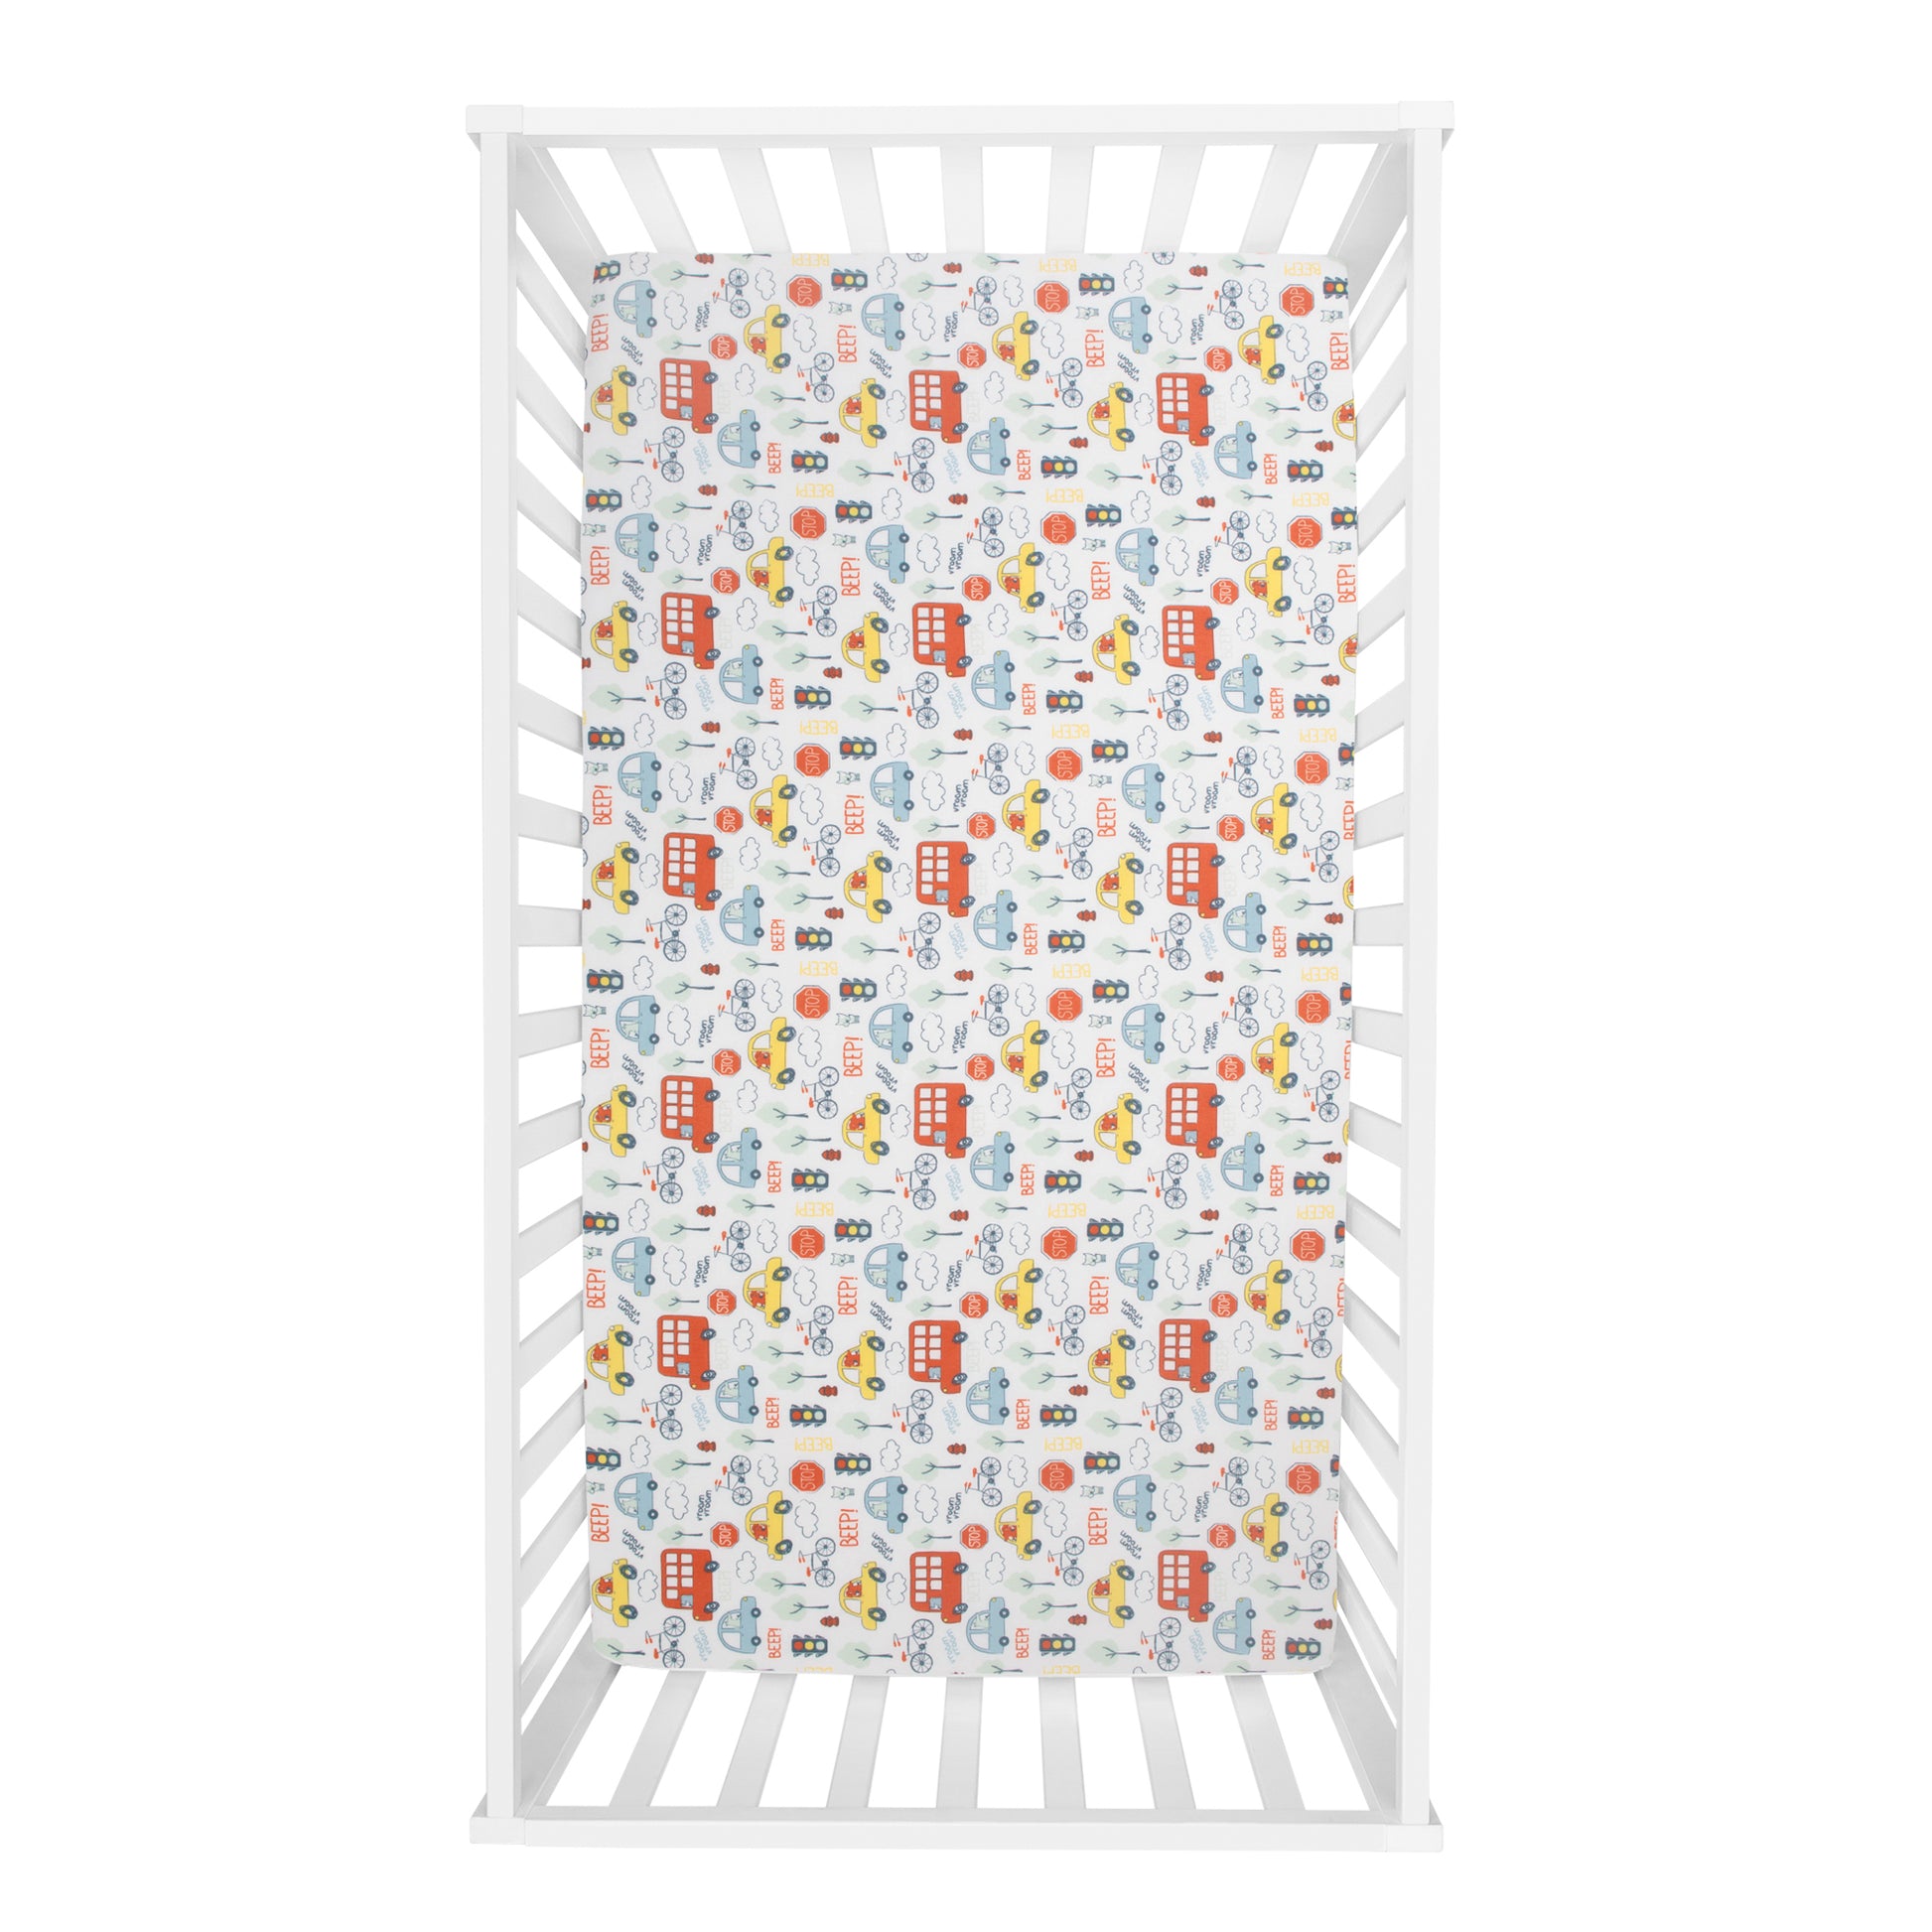  Beep Beep 4 Piece Bedding Set by Sammy and Lou- overhead view of crib sheet